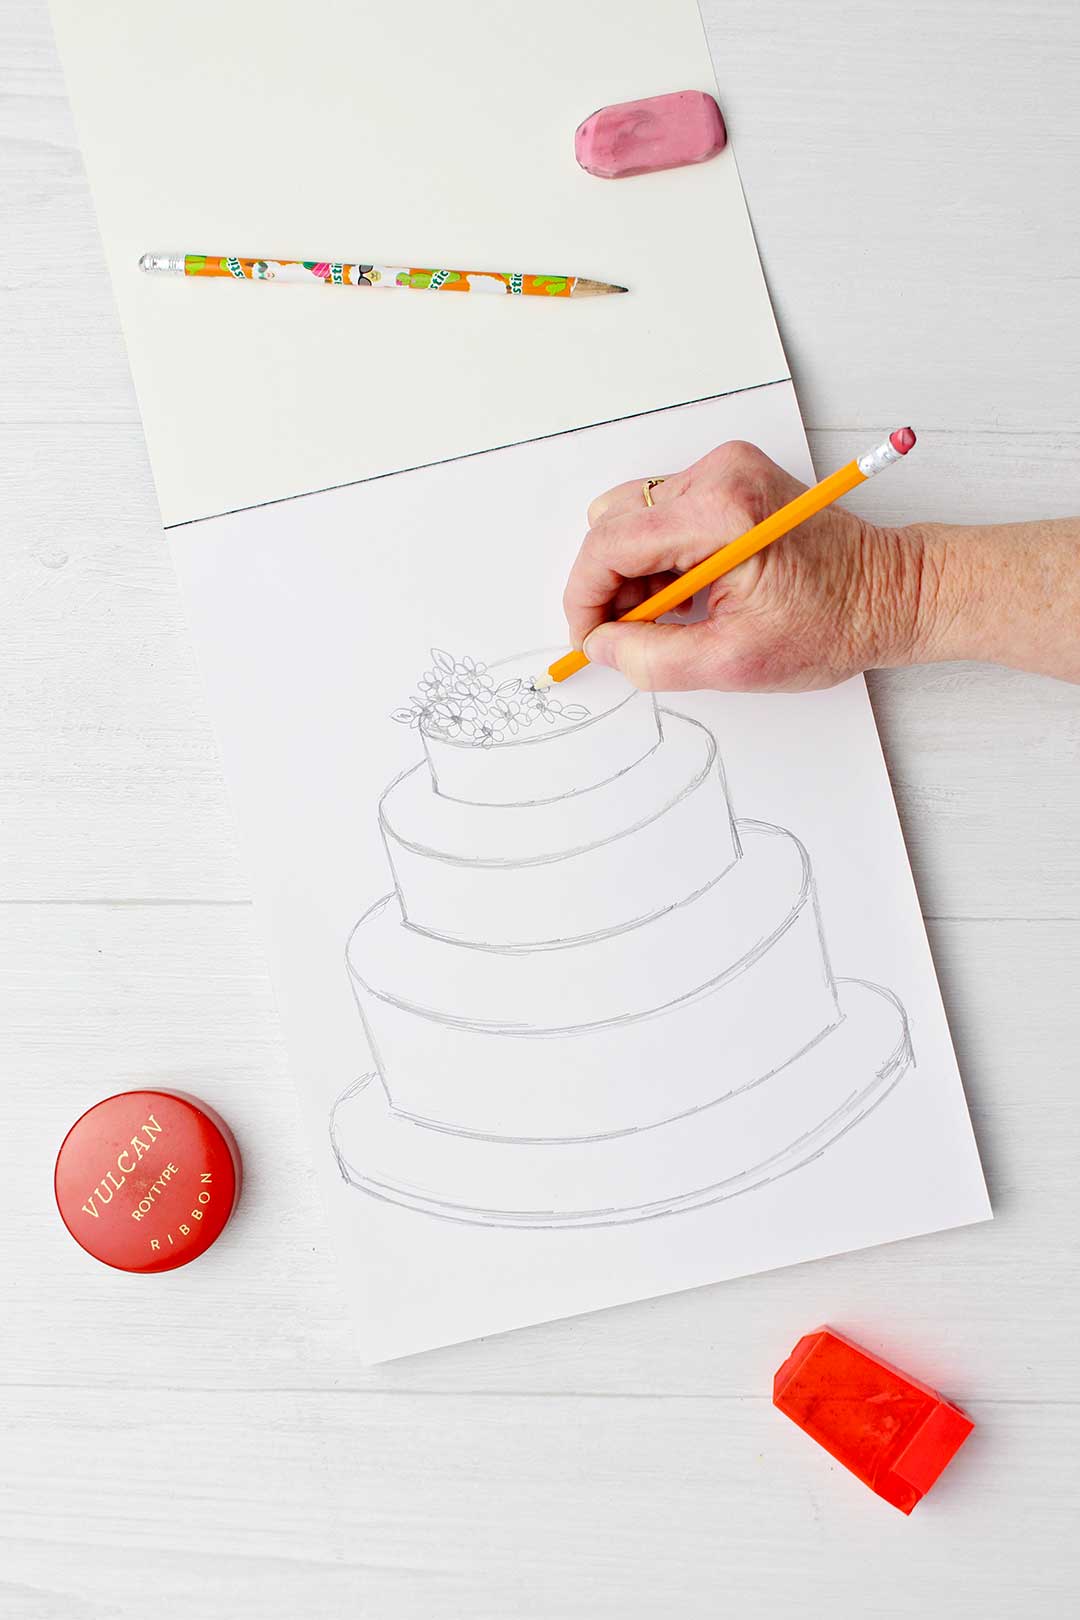 HOW TO DRAW A BIRTHDAY CAKE EASY - YouTube